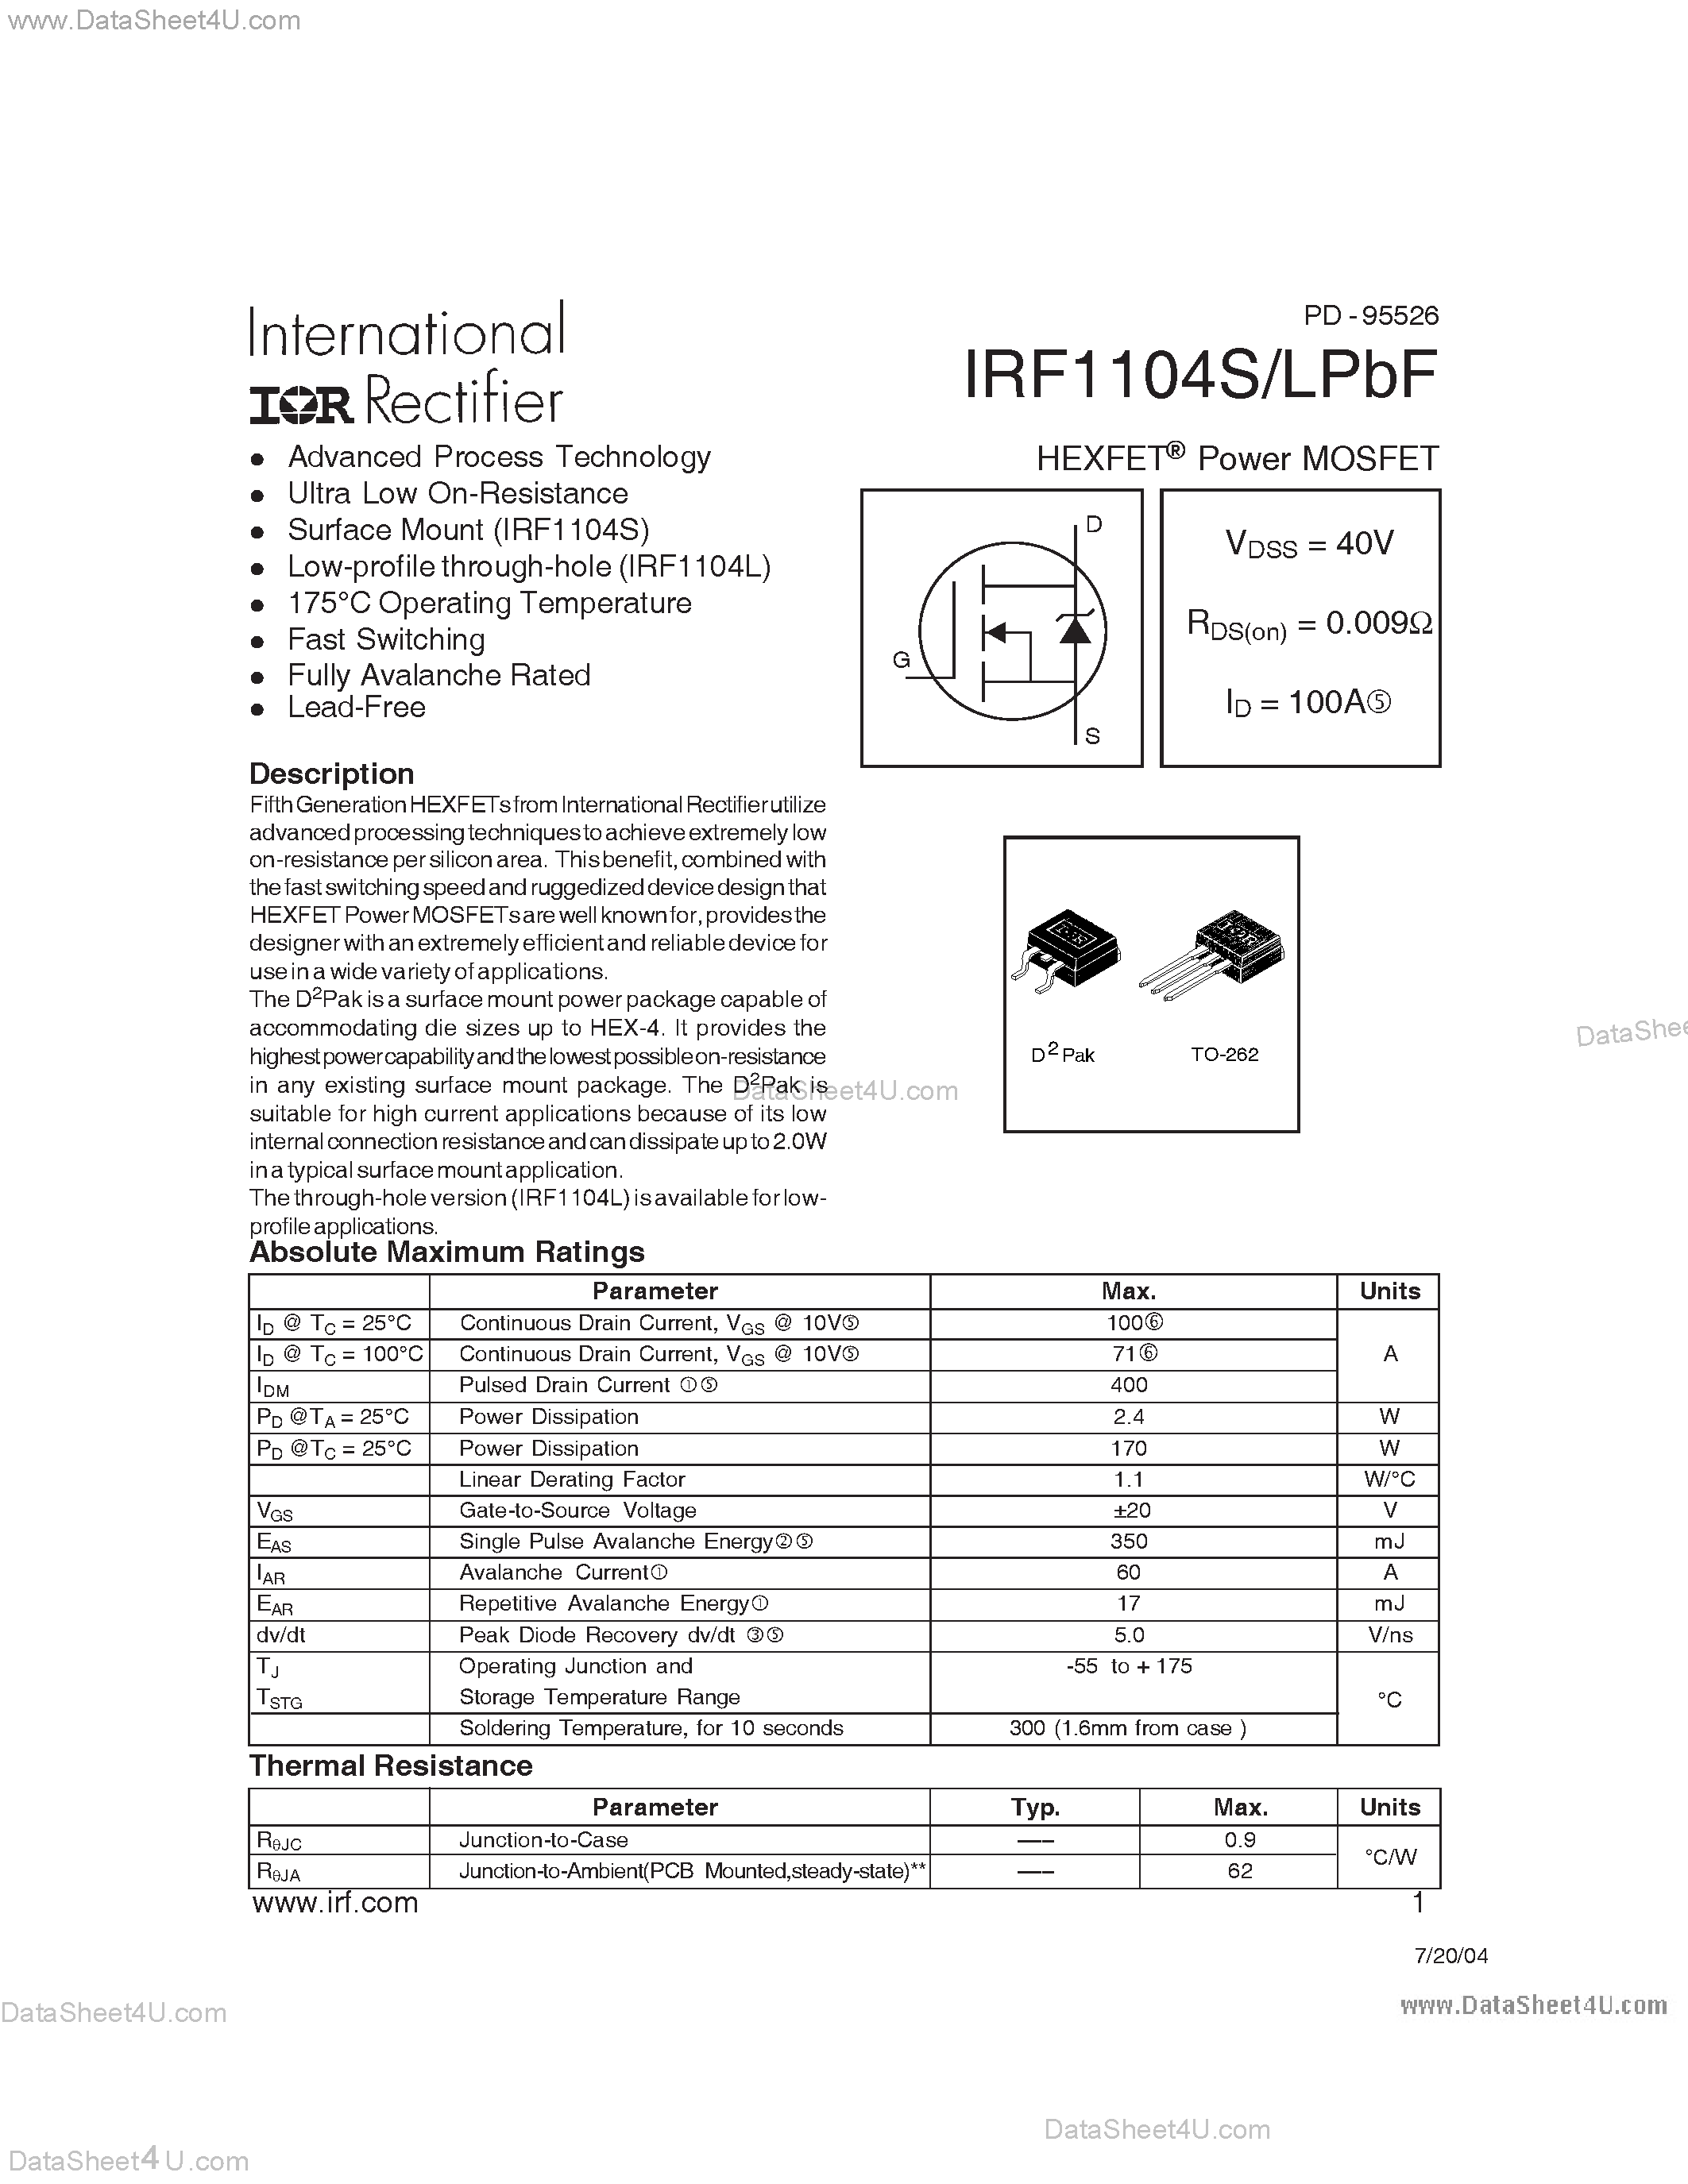 Datasheet IRF1104LPBF - (IRF1104S/LPBF) HEXFET Power MOSFET page 1